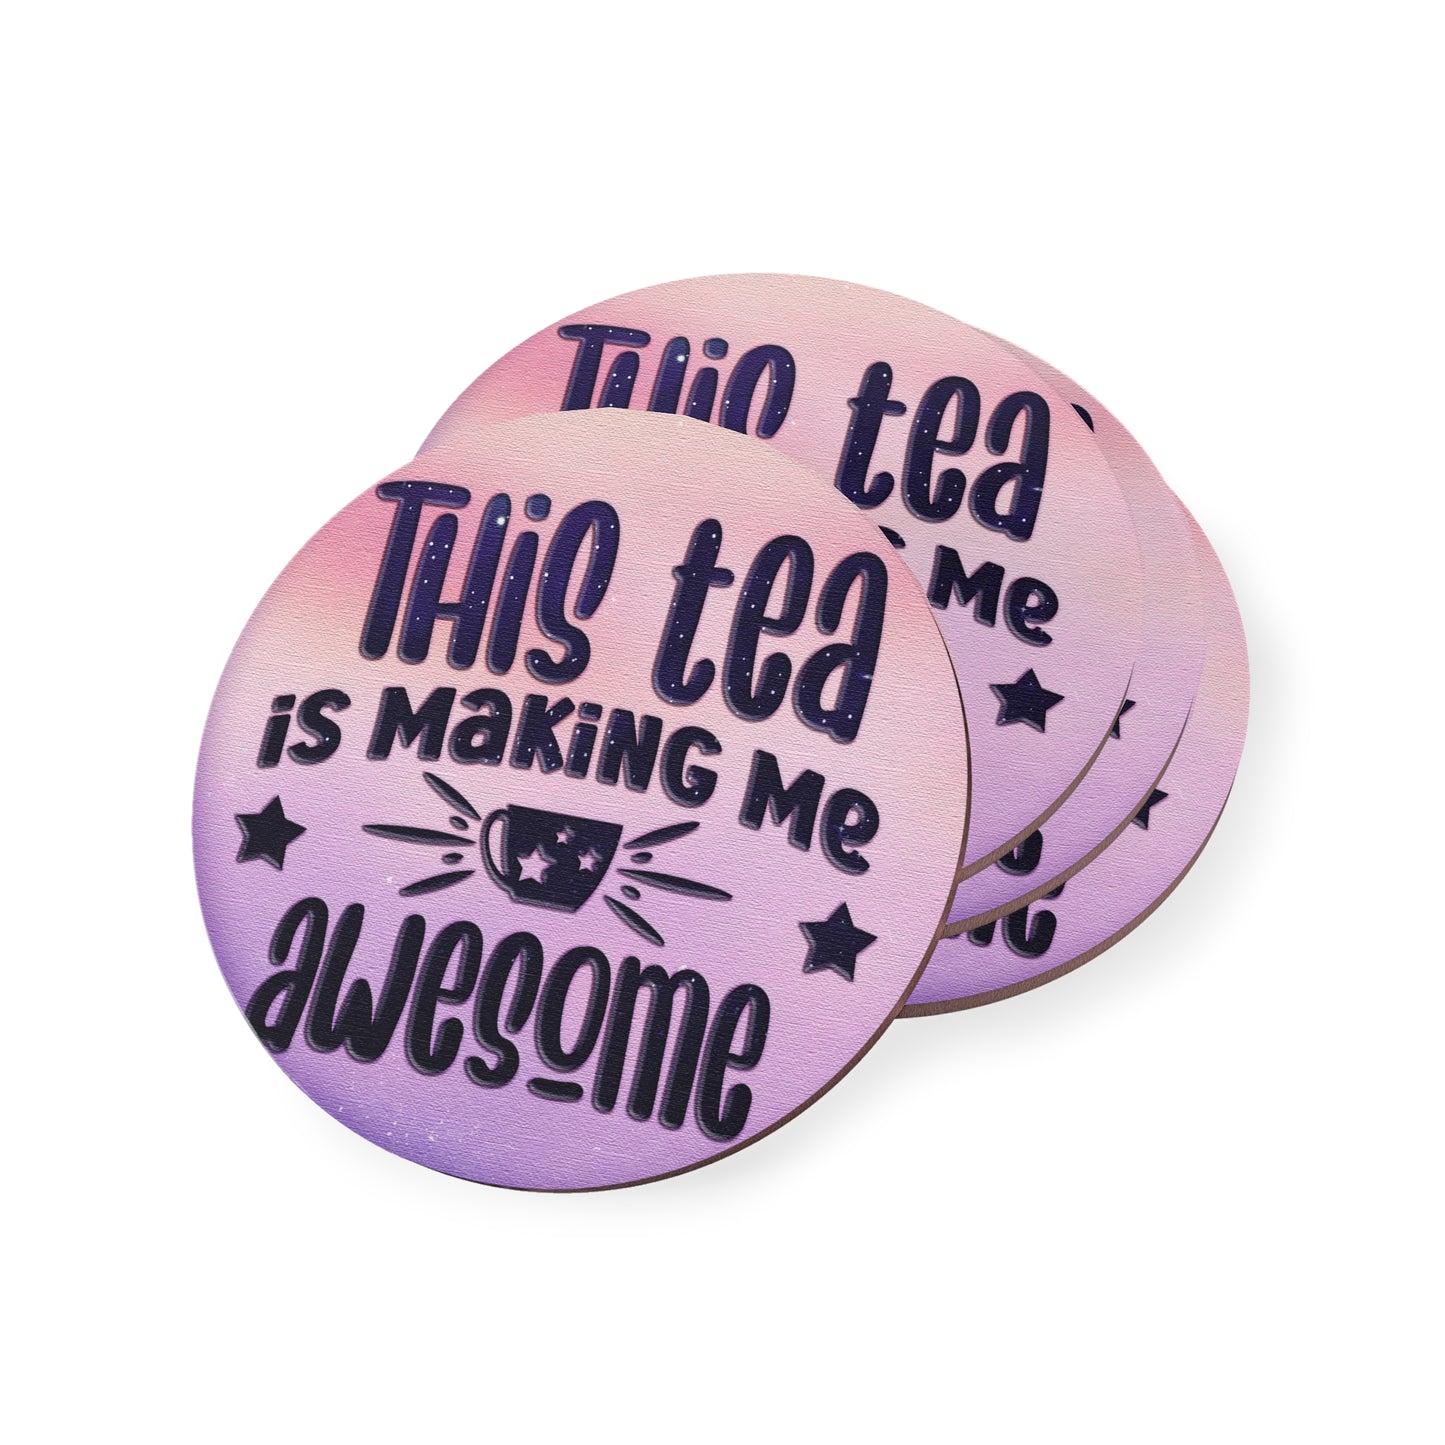 " This Tea Is Making Me Look Awesome" Round Coasters